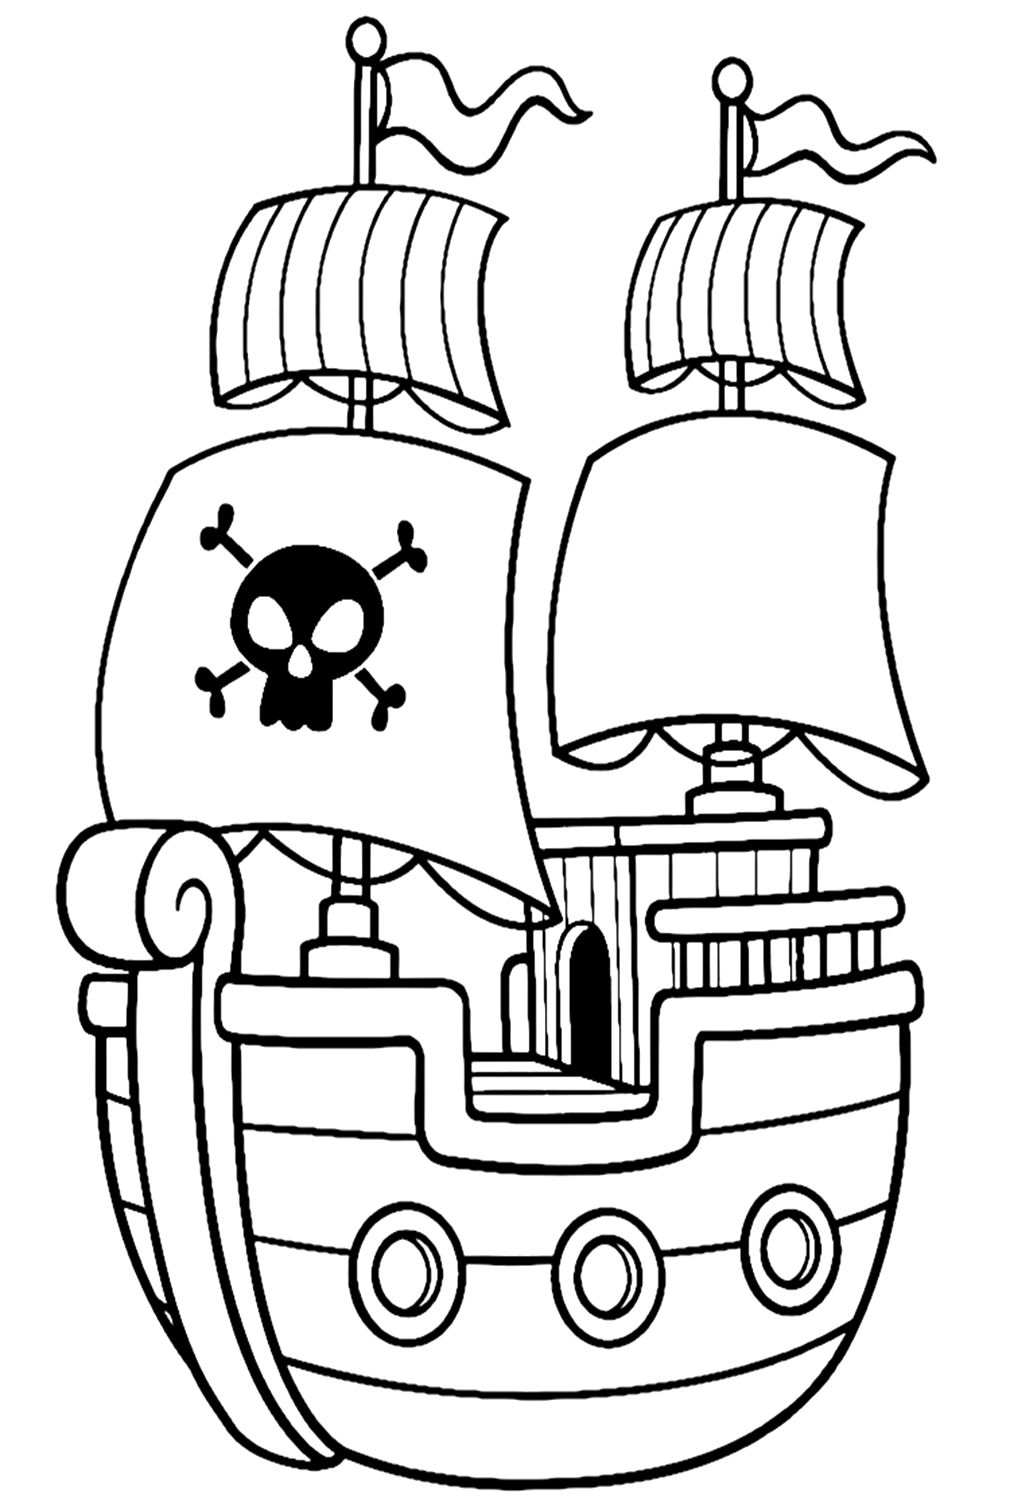 Pirate Ship for Kids Coloring Pages